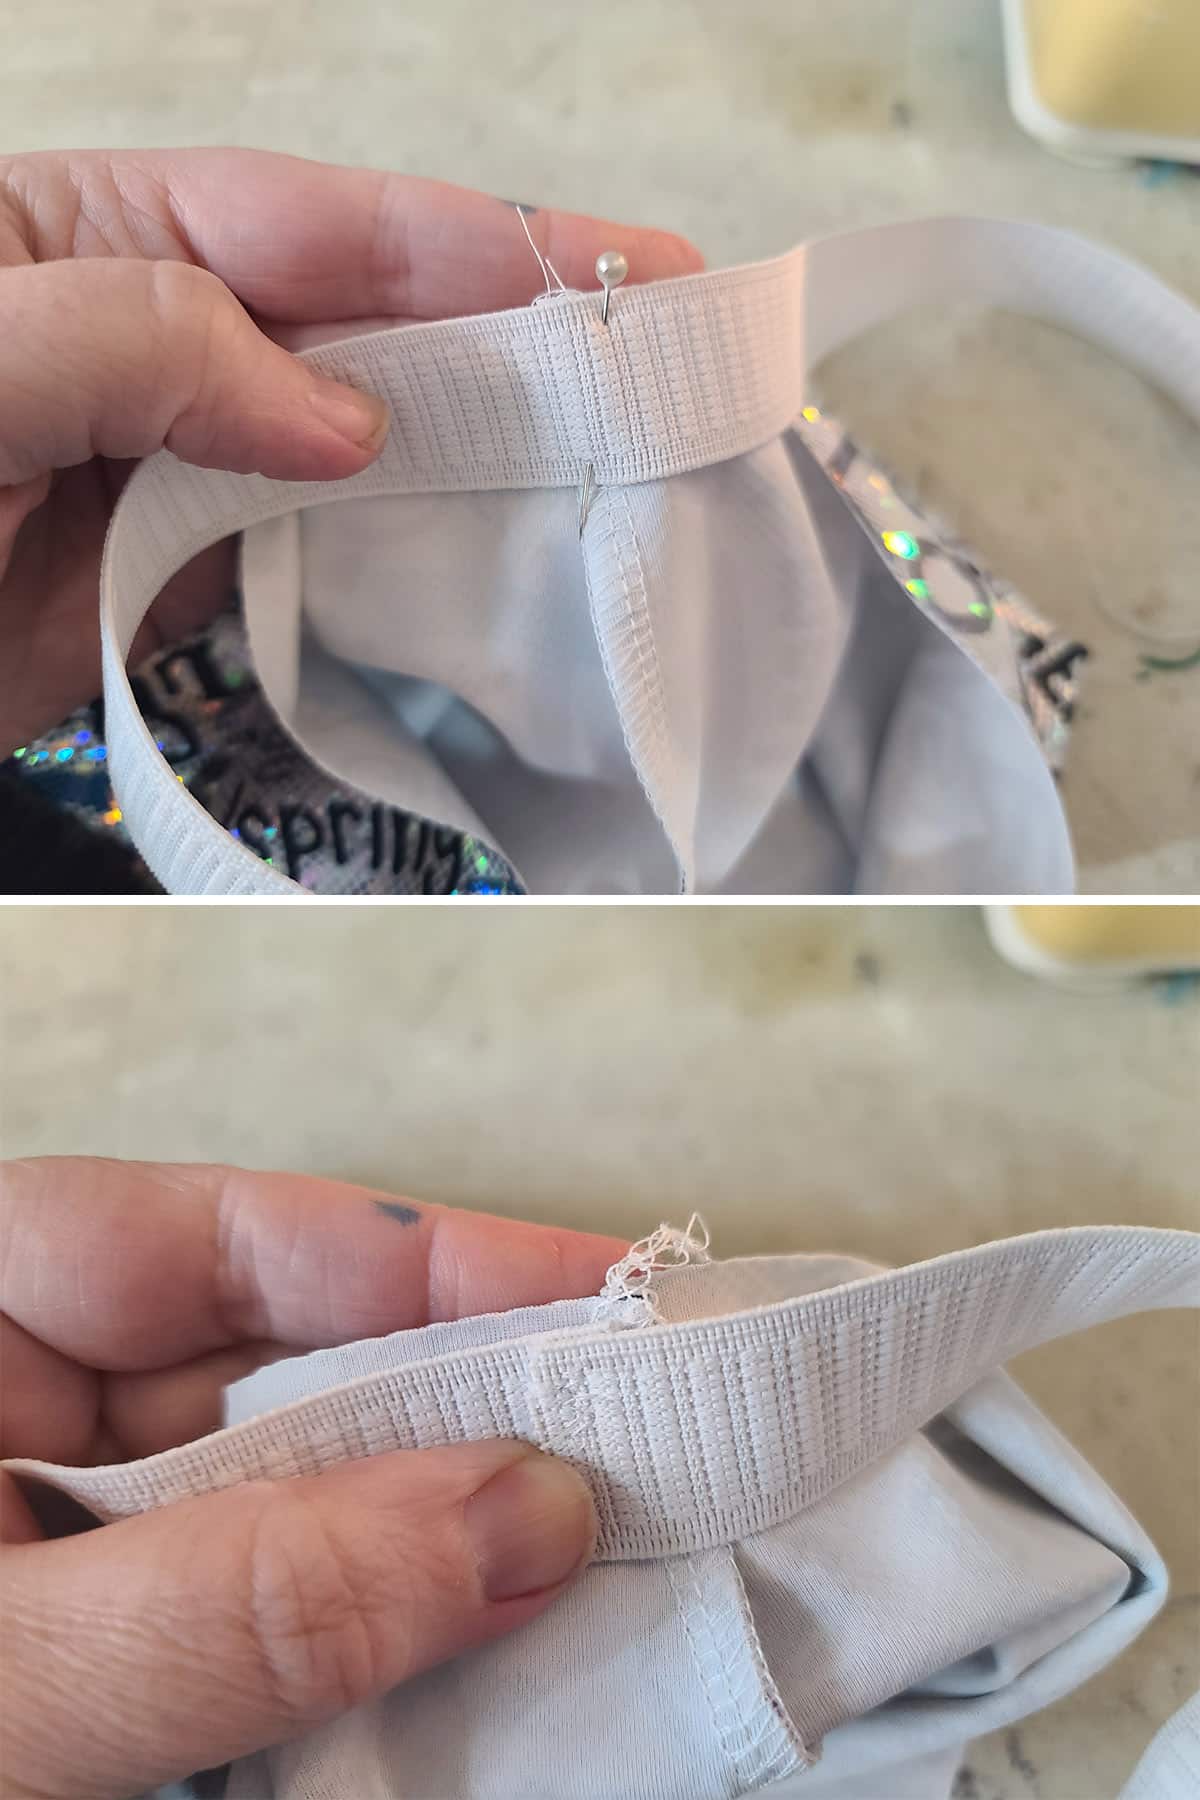 A 2 part image showing the halfway point of the elastic loop being pinned to the center front of a pair of booty shorts.